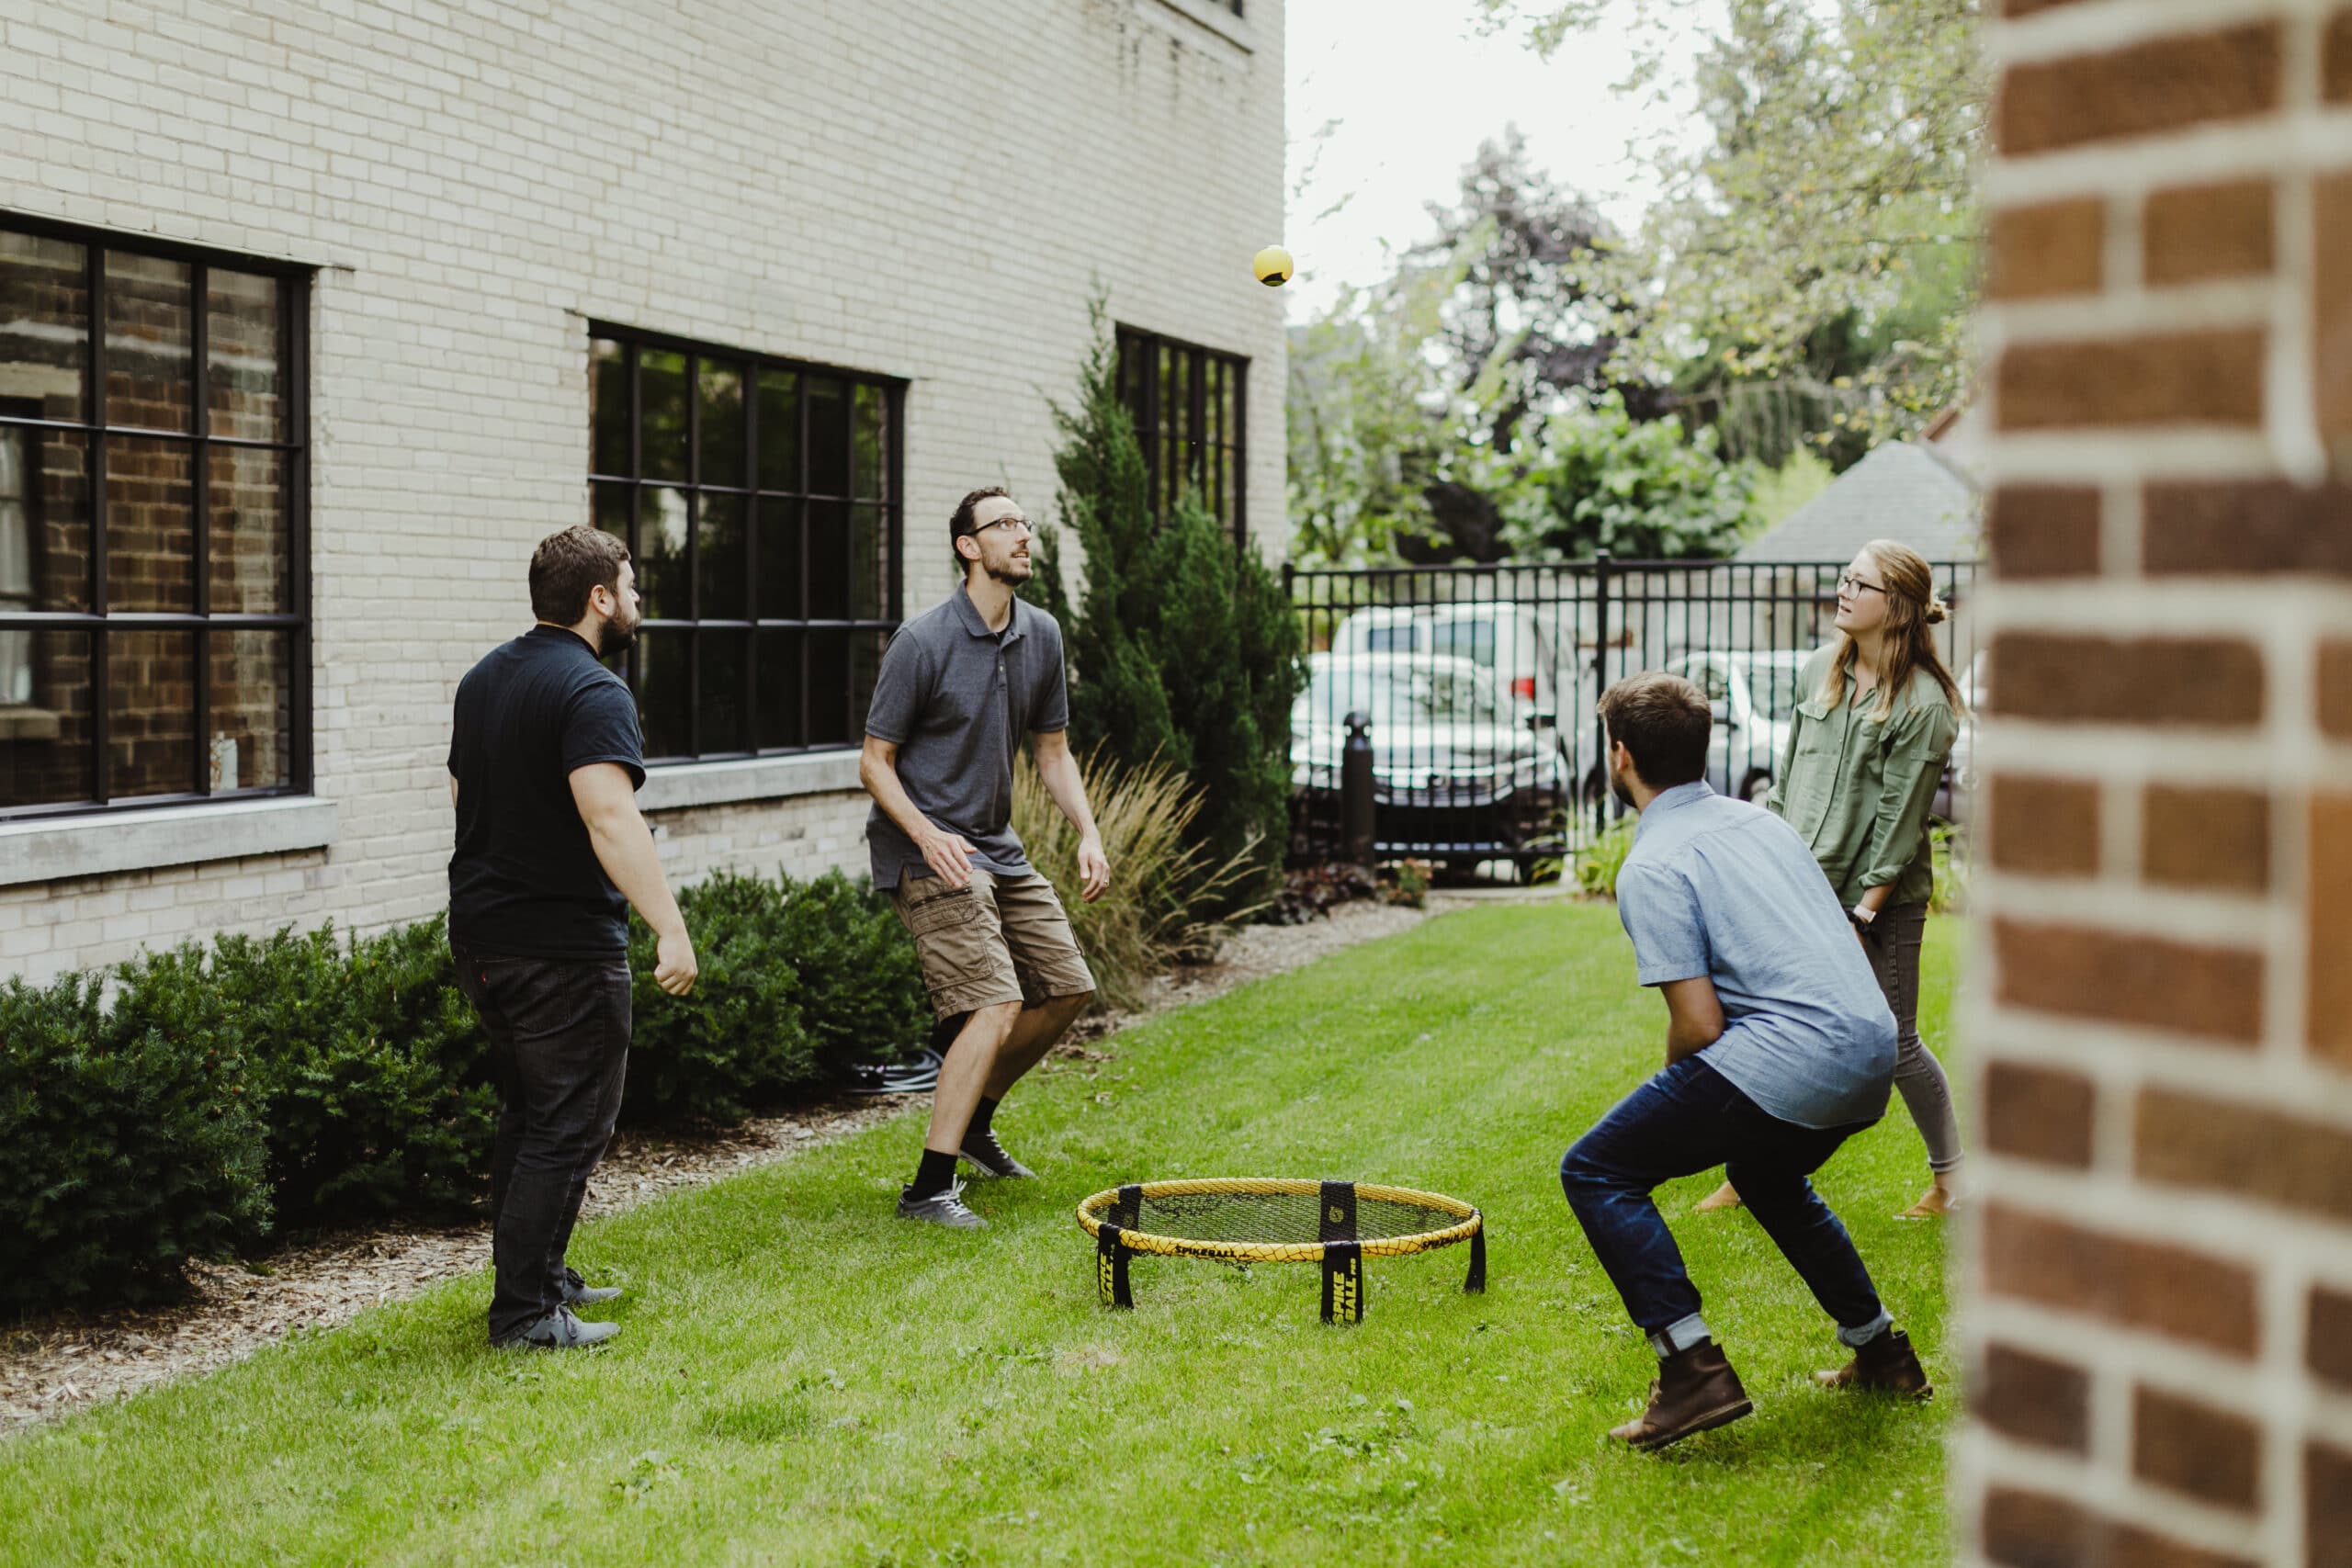 Playing ping-pong or other games can help build team morale